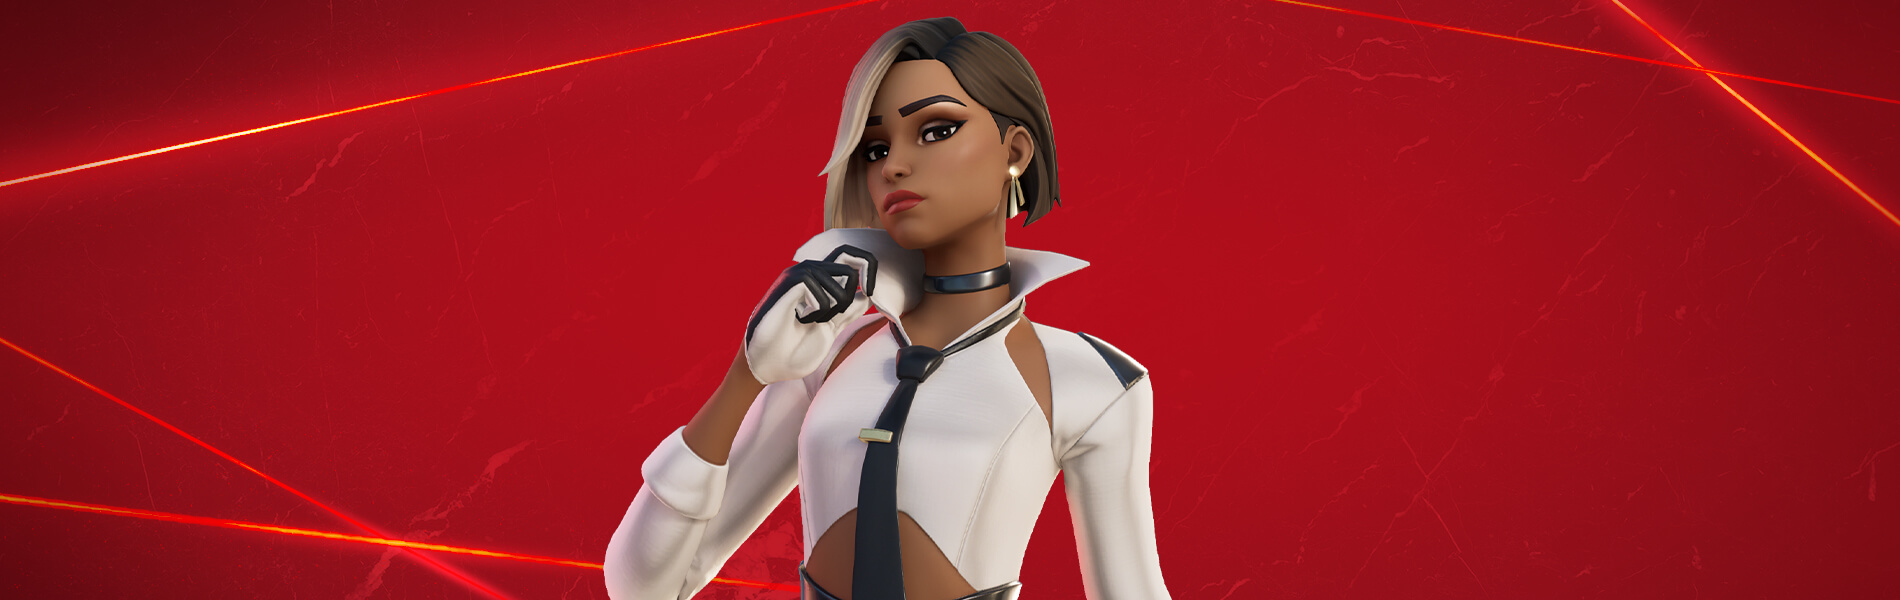 fortnite-antonia-outfit-unmasked-1900x600-ea4d07bdd840